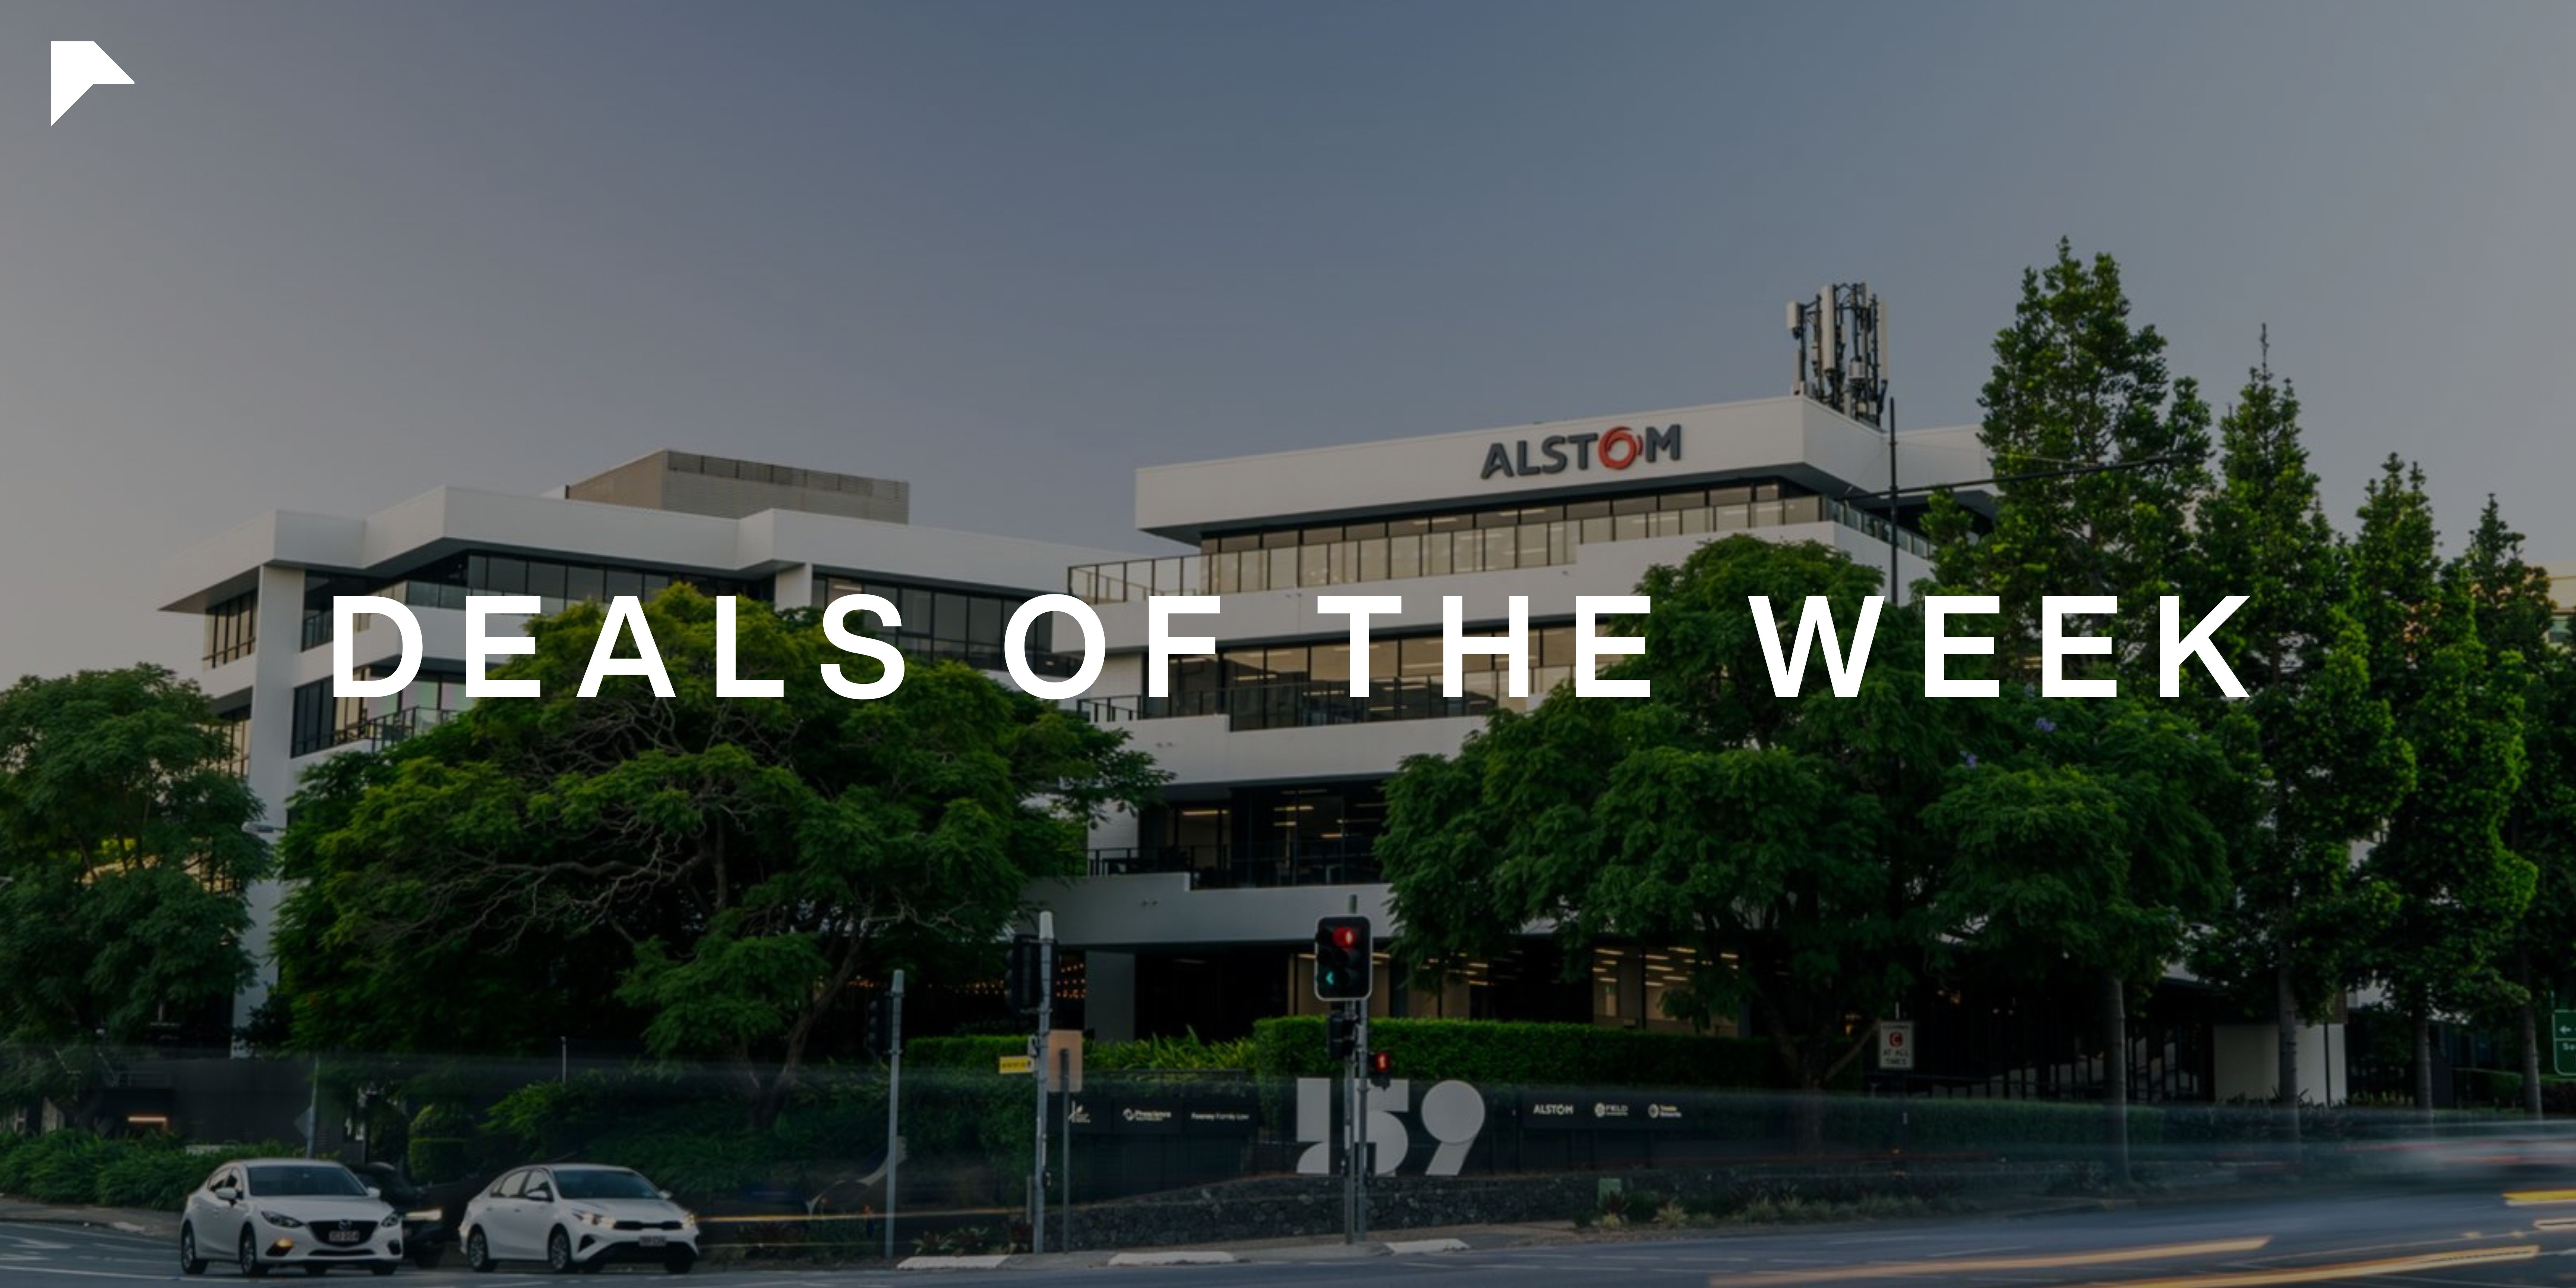 Deals of the Week - 22 August 2022